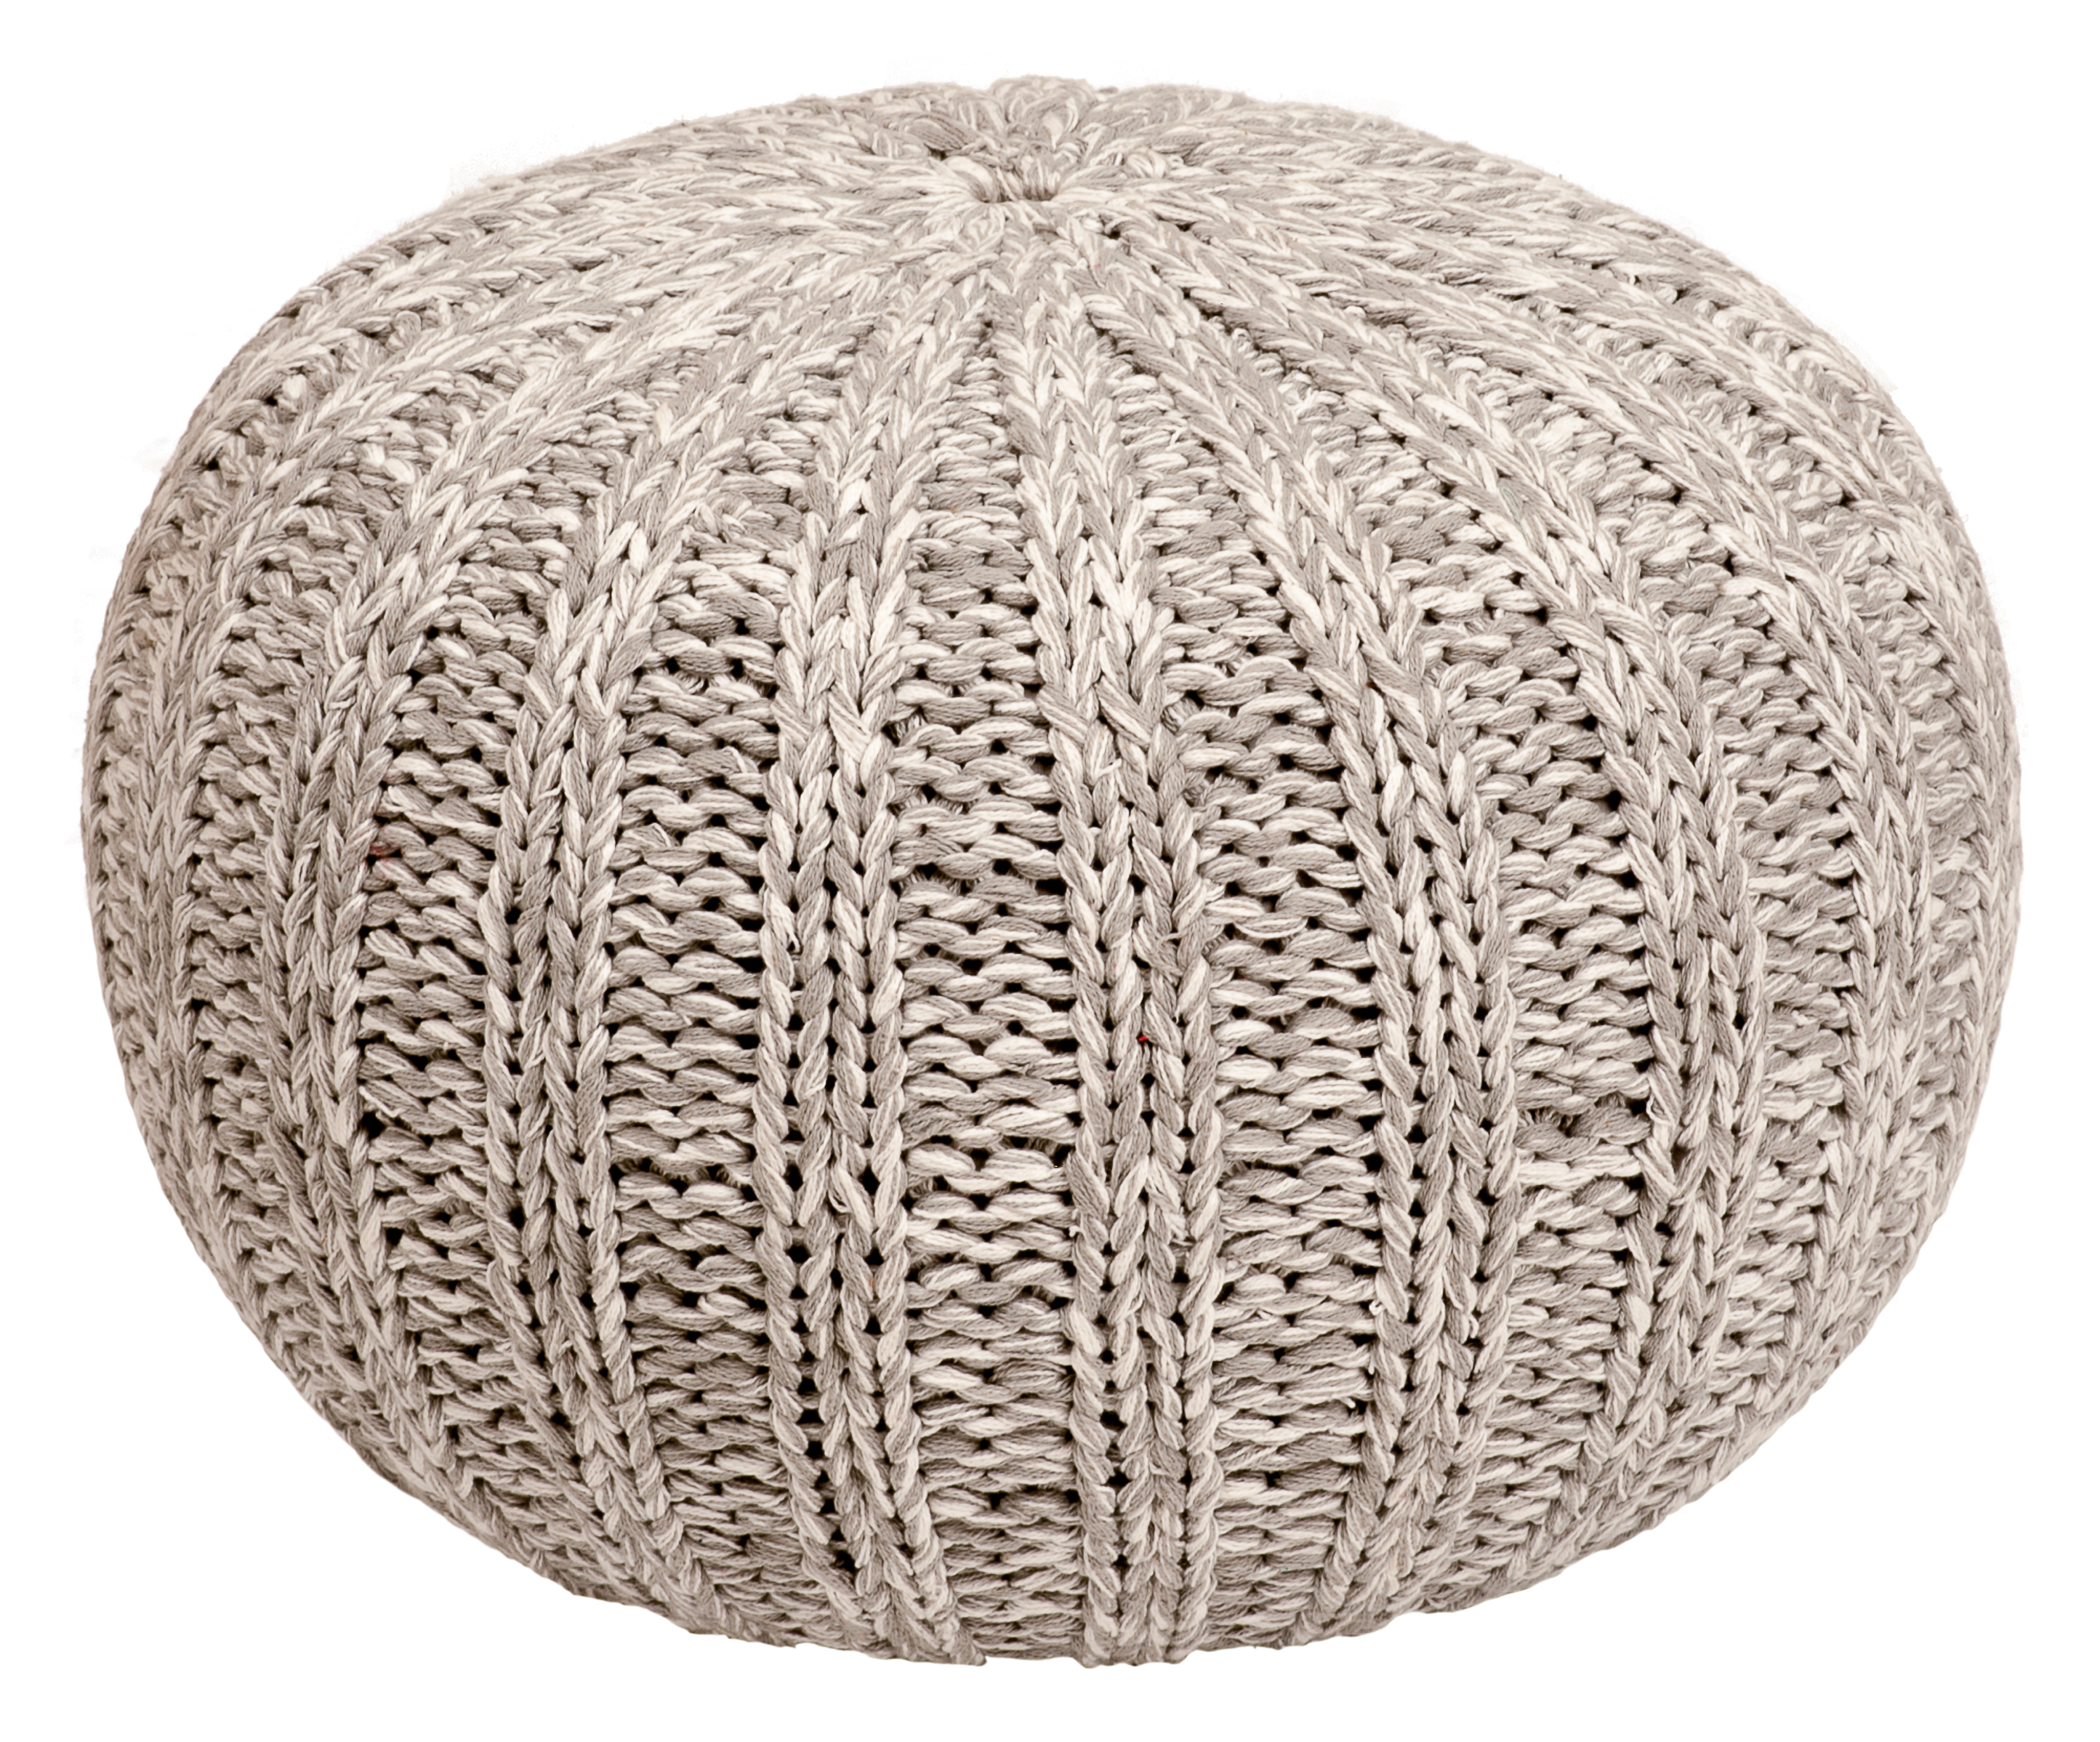 Knitted Pouf Chambray gris clairnaturel